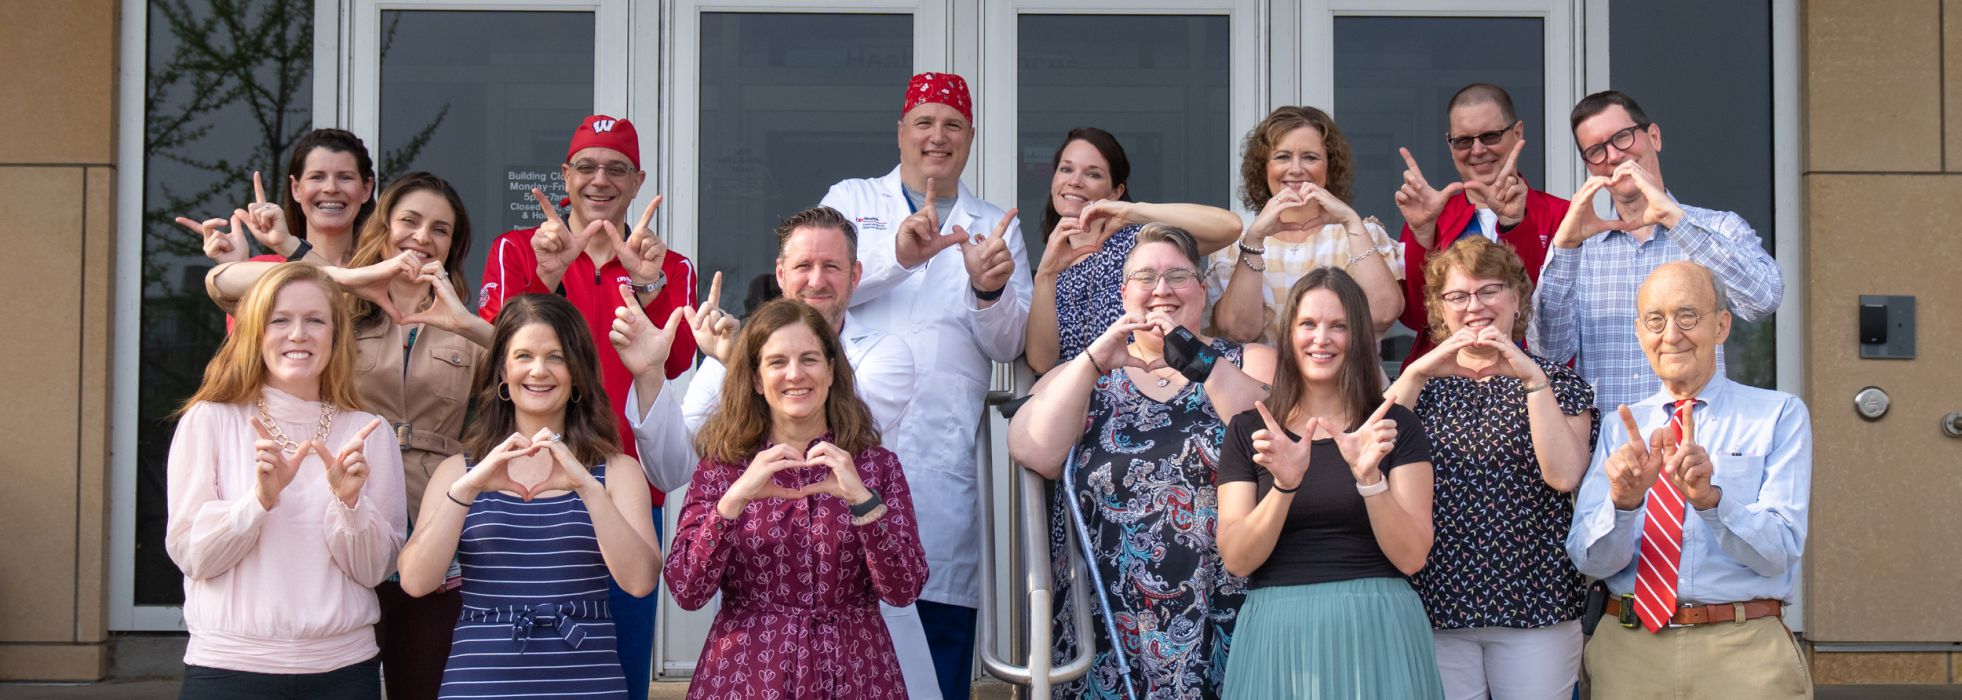 Group photo of congenital heart team making W sign with their hands